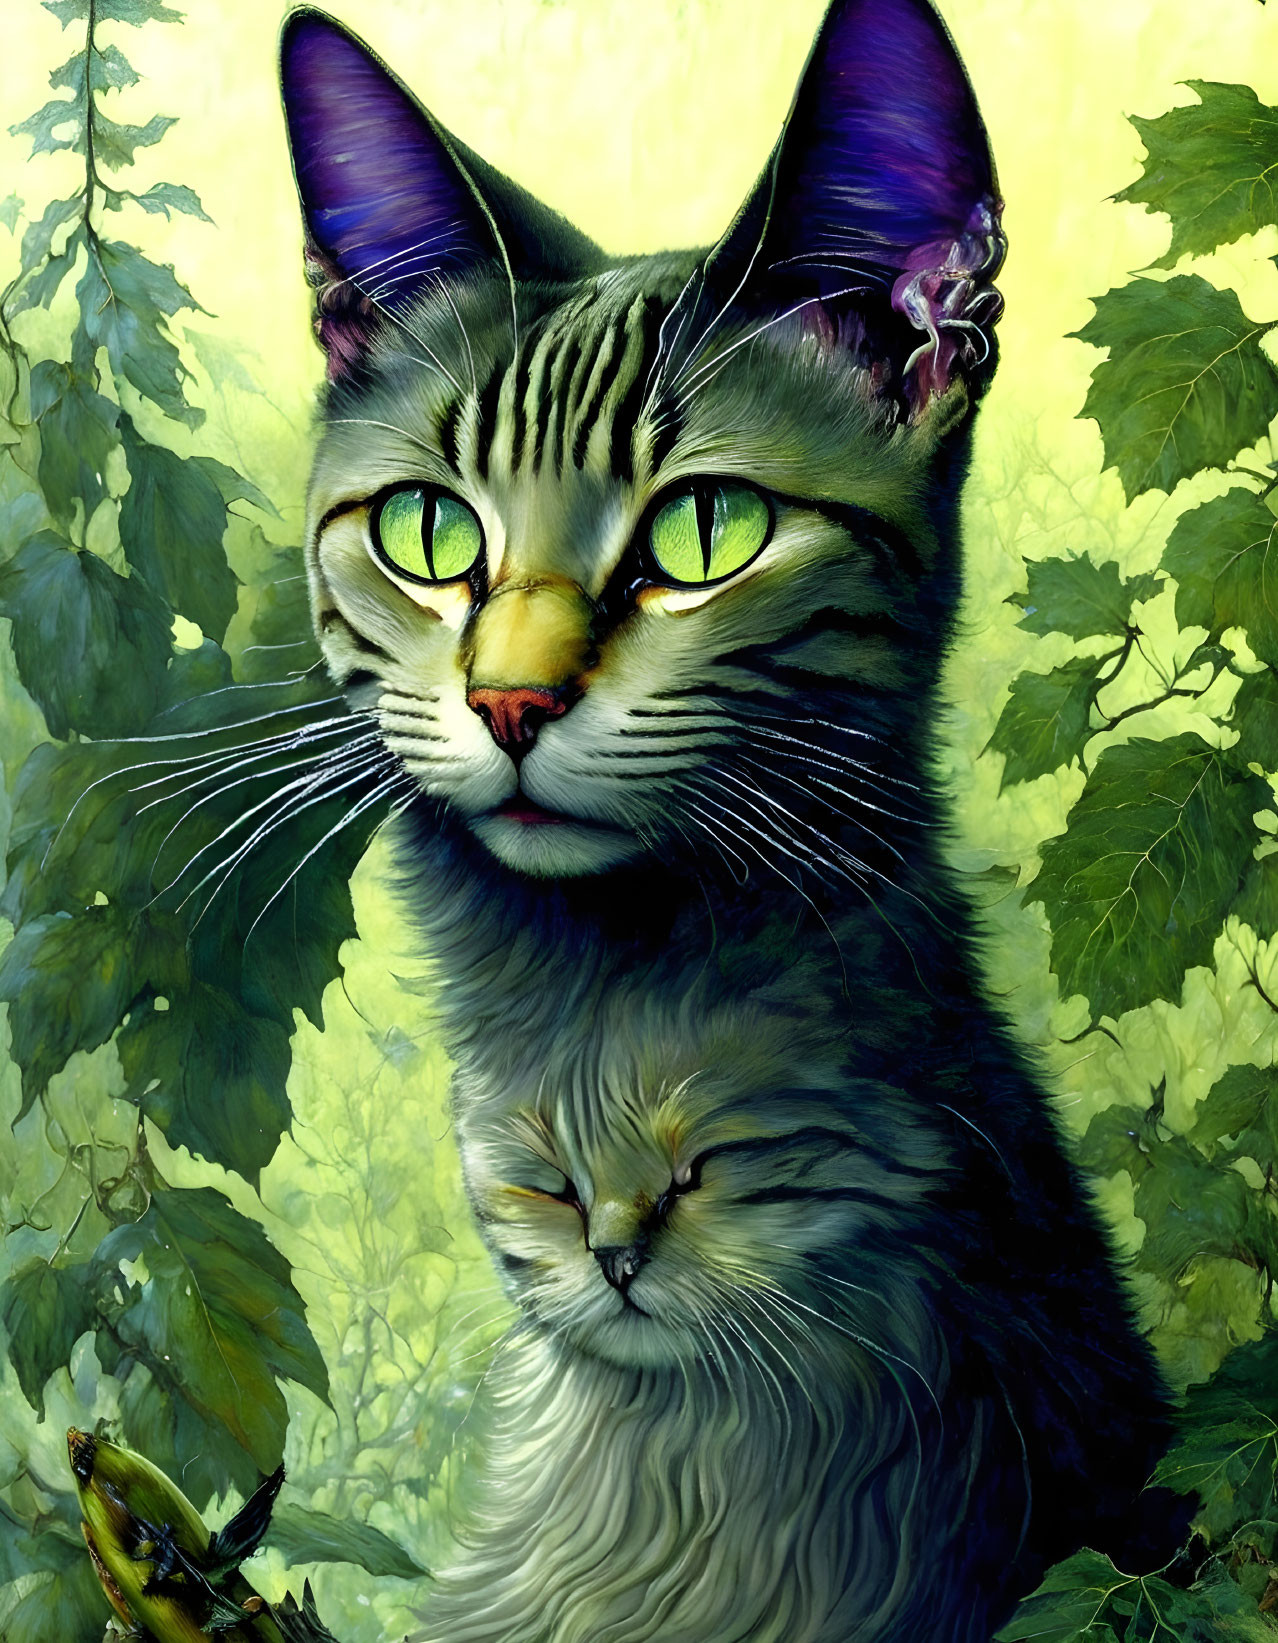 Whimsical cat illustration with small cat and frog in leafy background